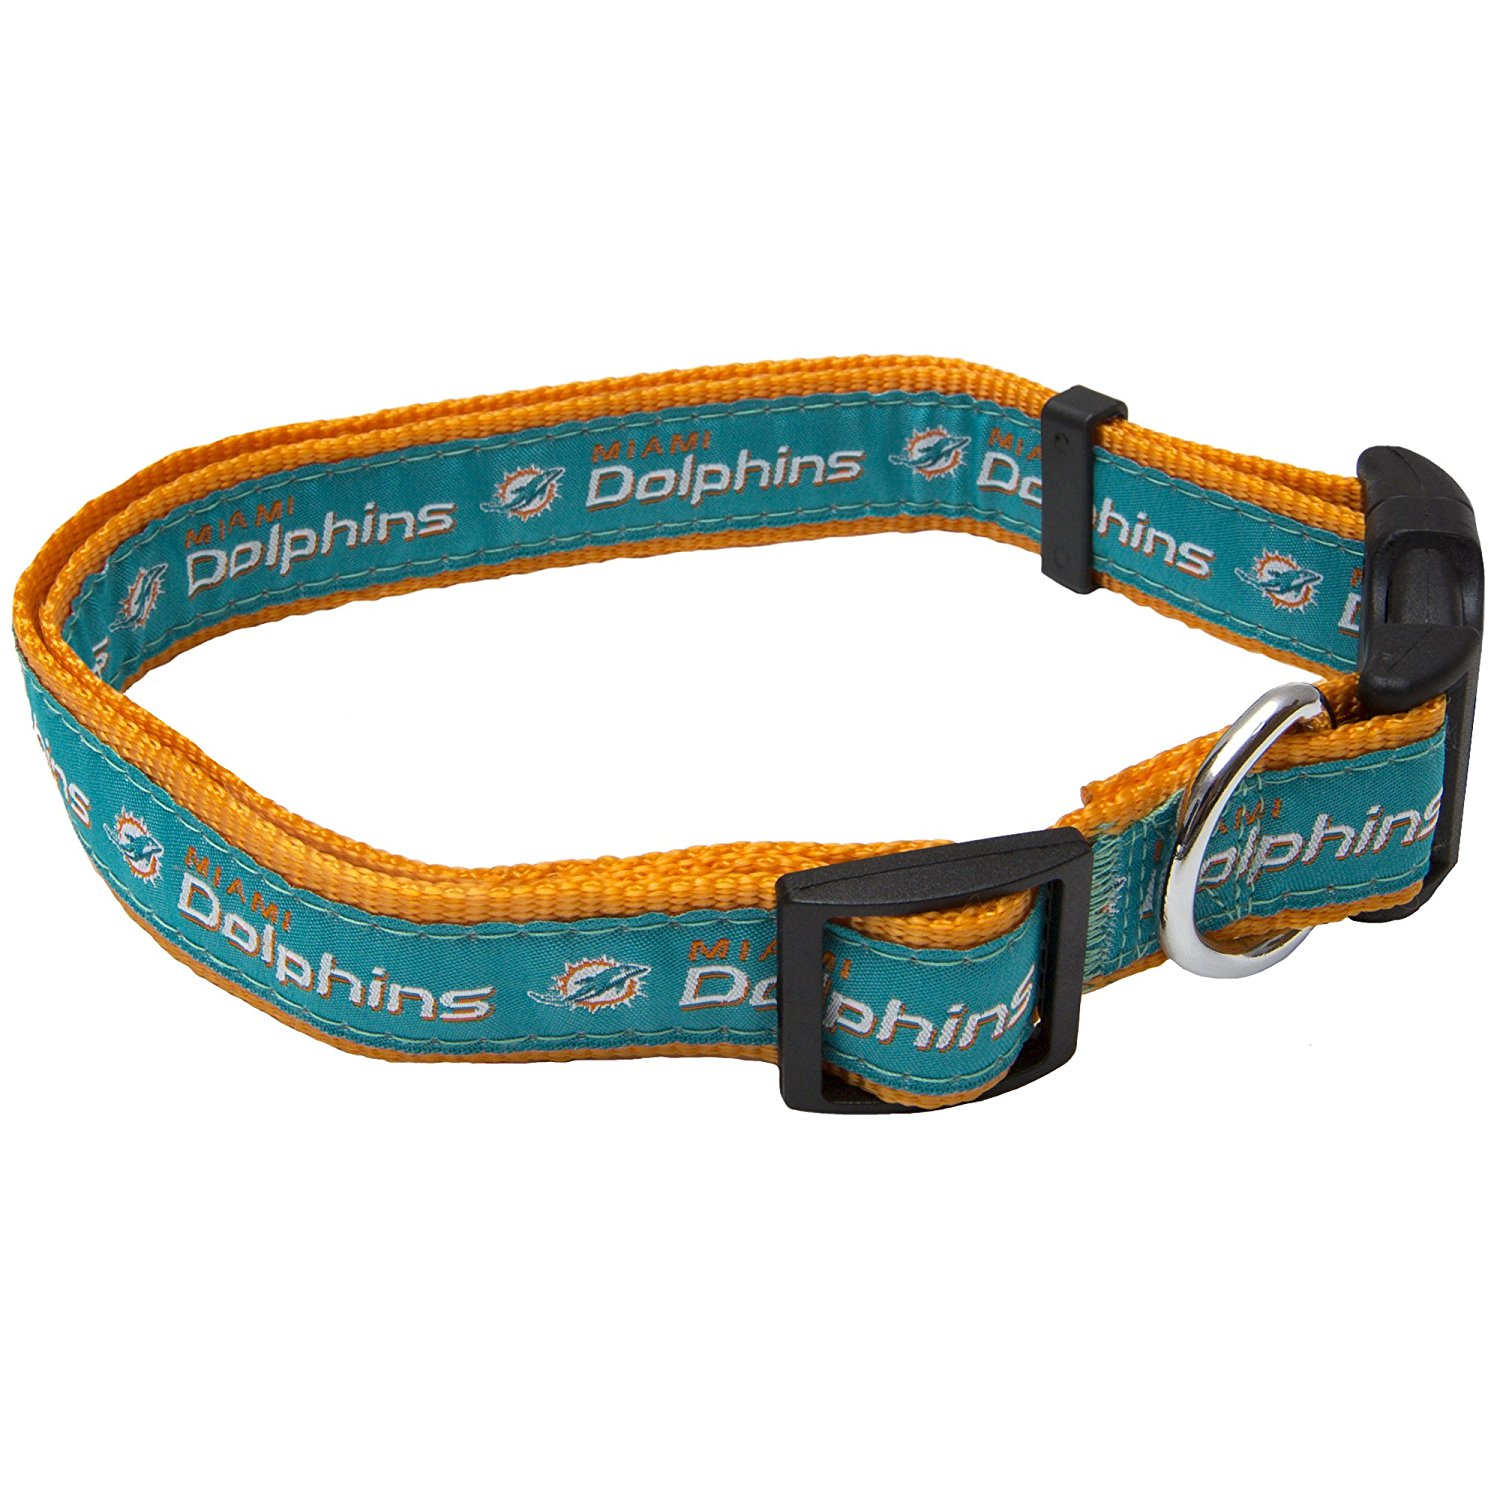 Pets First NFL Miami Dolphins Dog Collar - Heavy-Duty, Durable & Adjustable Football Collar for Dogs/ CATS - Large - image 1 of 2